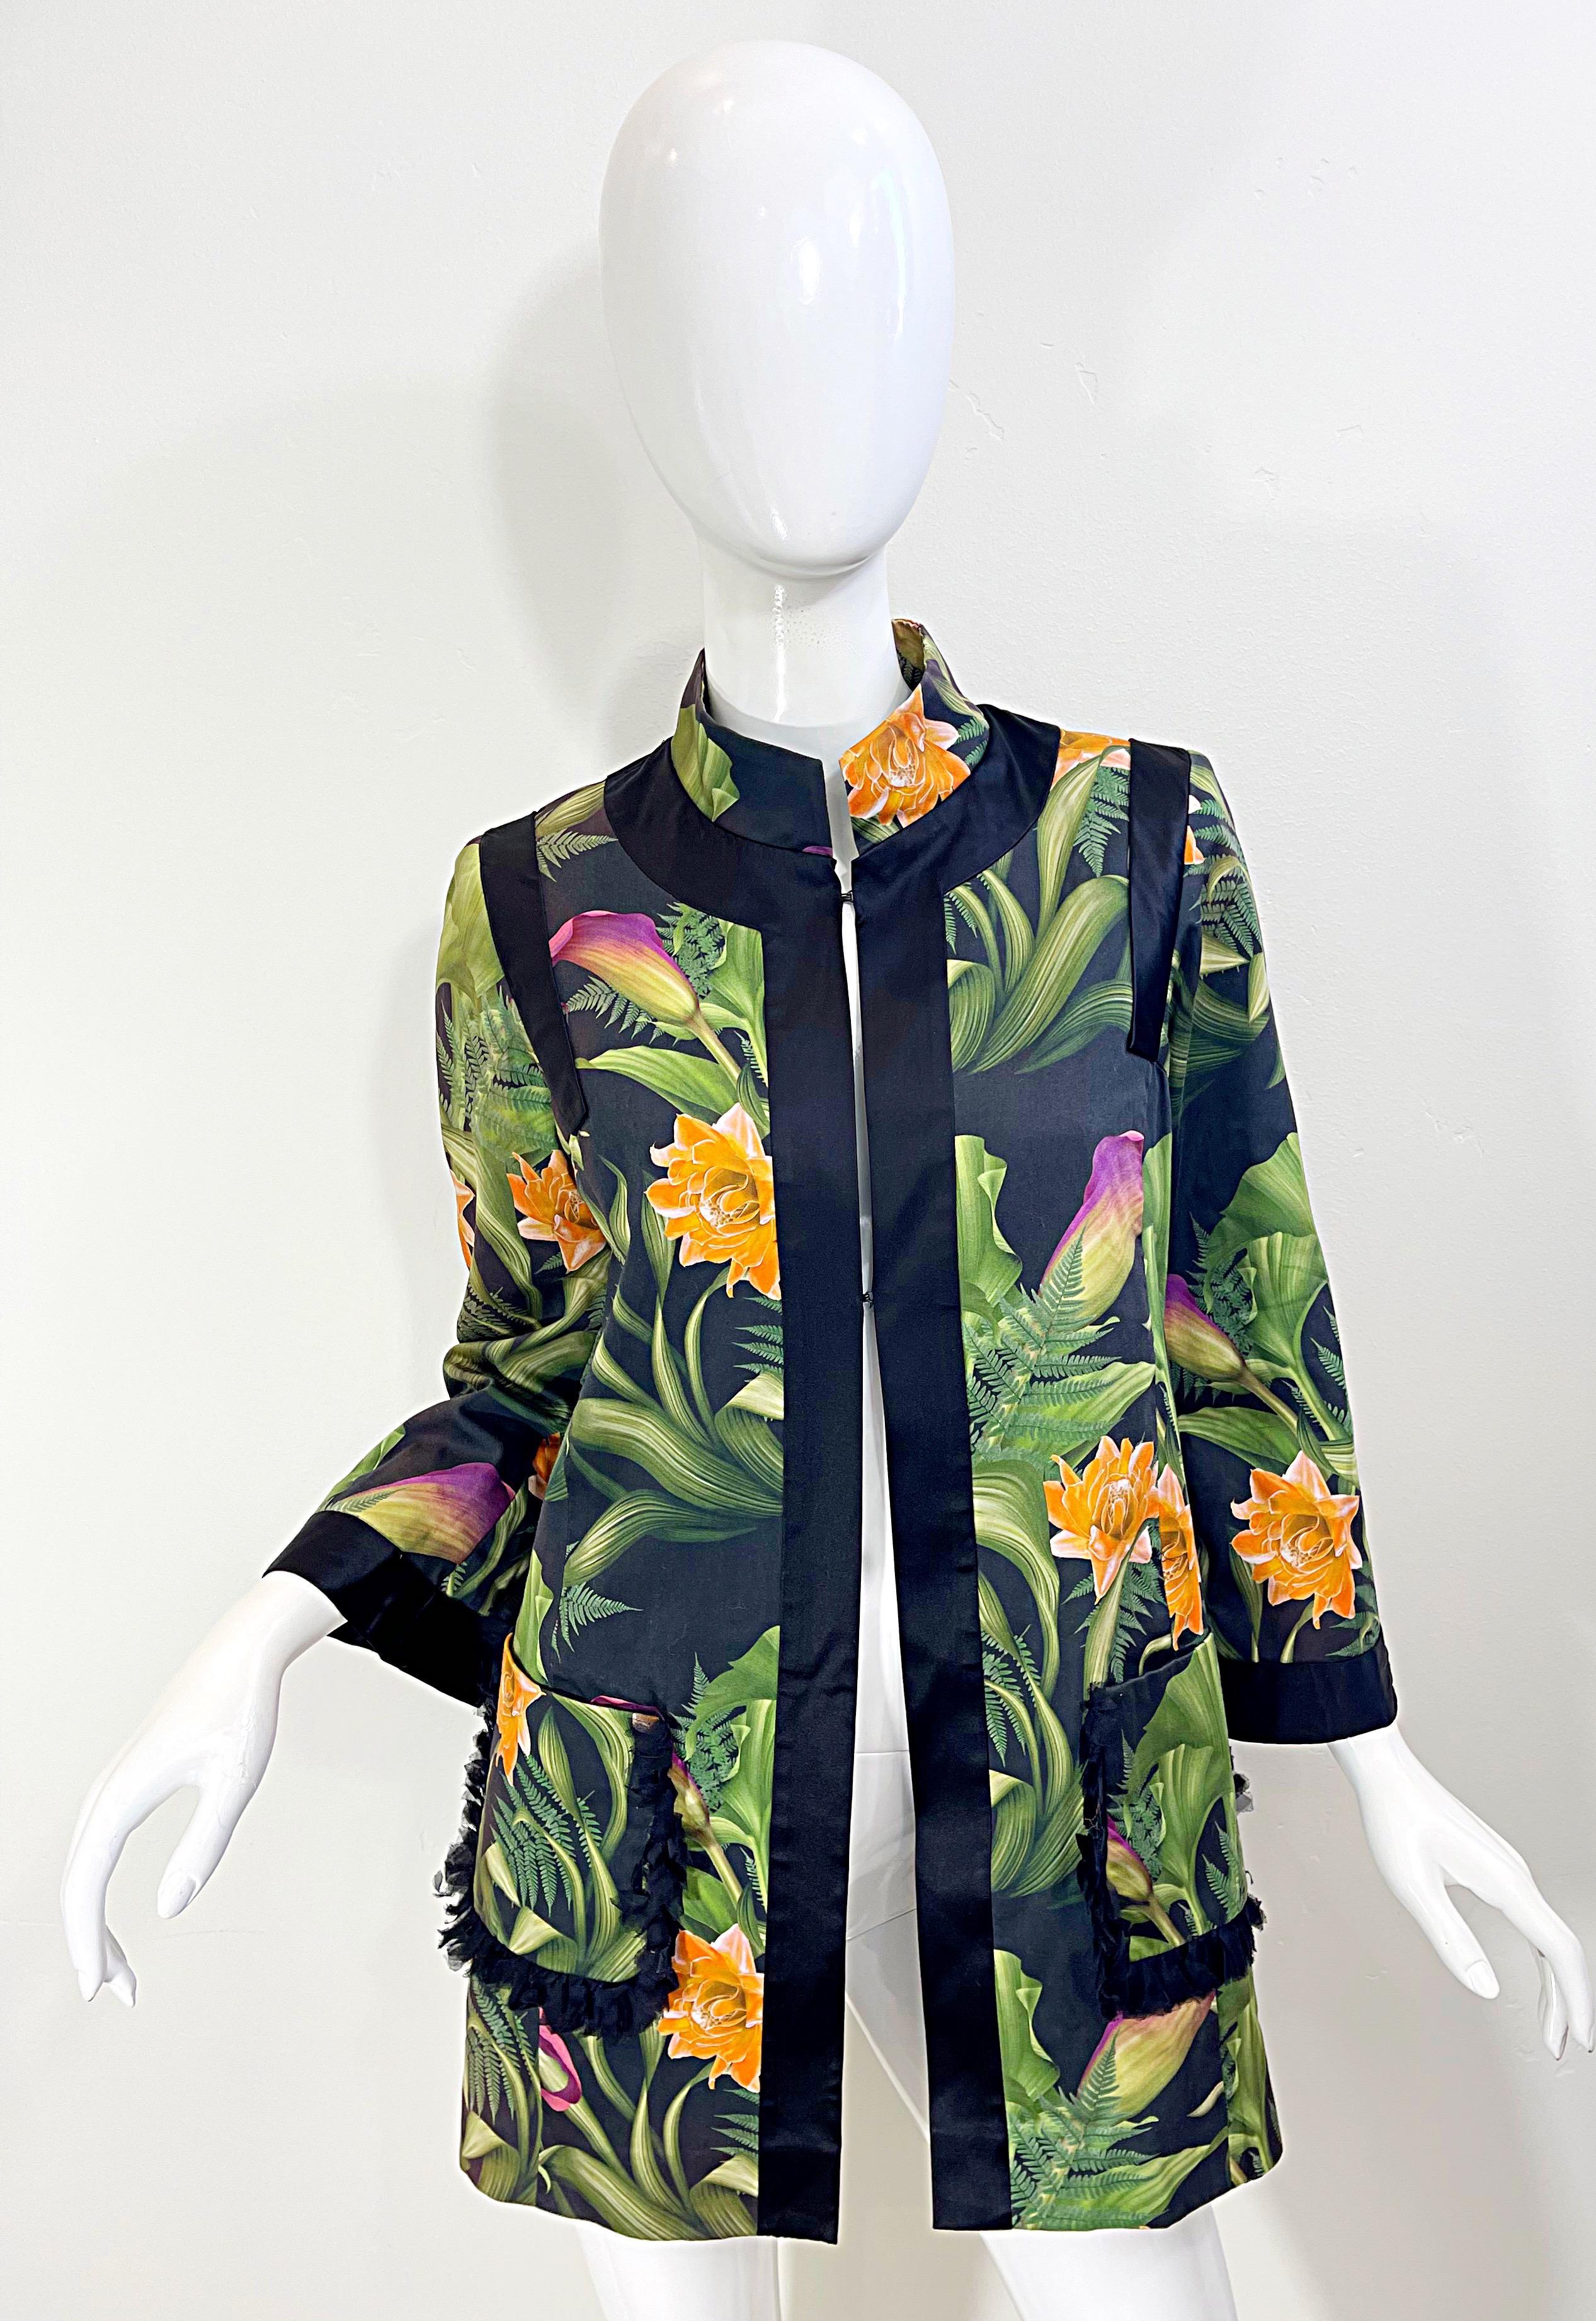 Beautiful 1990s PAOLA QUADRETTI Couture botanical garden printed silk jacket ! Vibrant colors of purple, fuchsia, orange, green and black. Black chiffon detail on each pocket. Hidden hook-and-eye closures ( two ) at neck and bust. Couture quality.